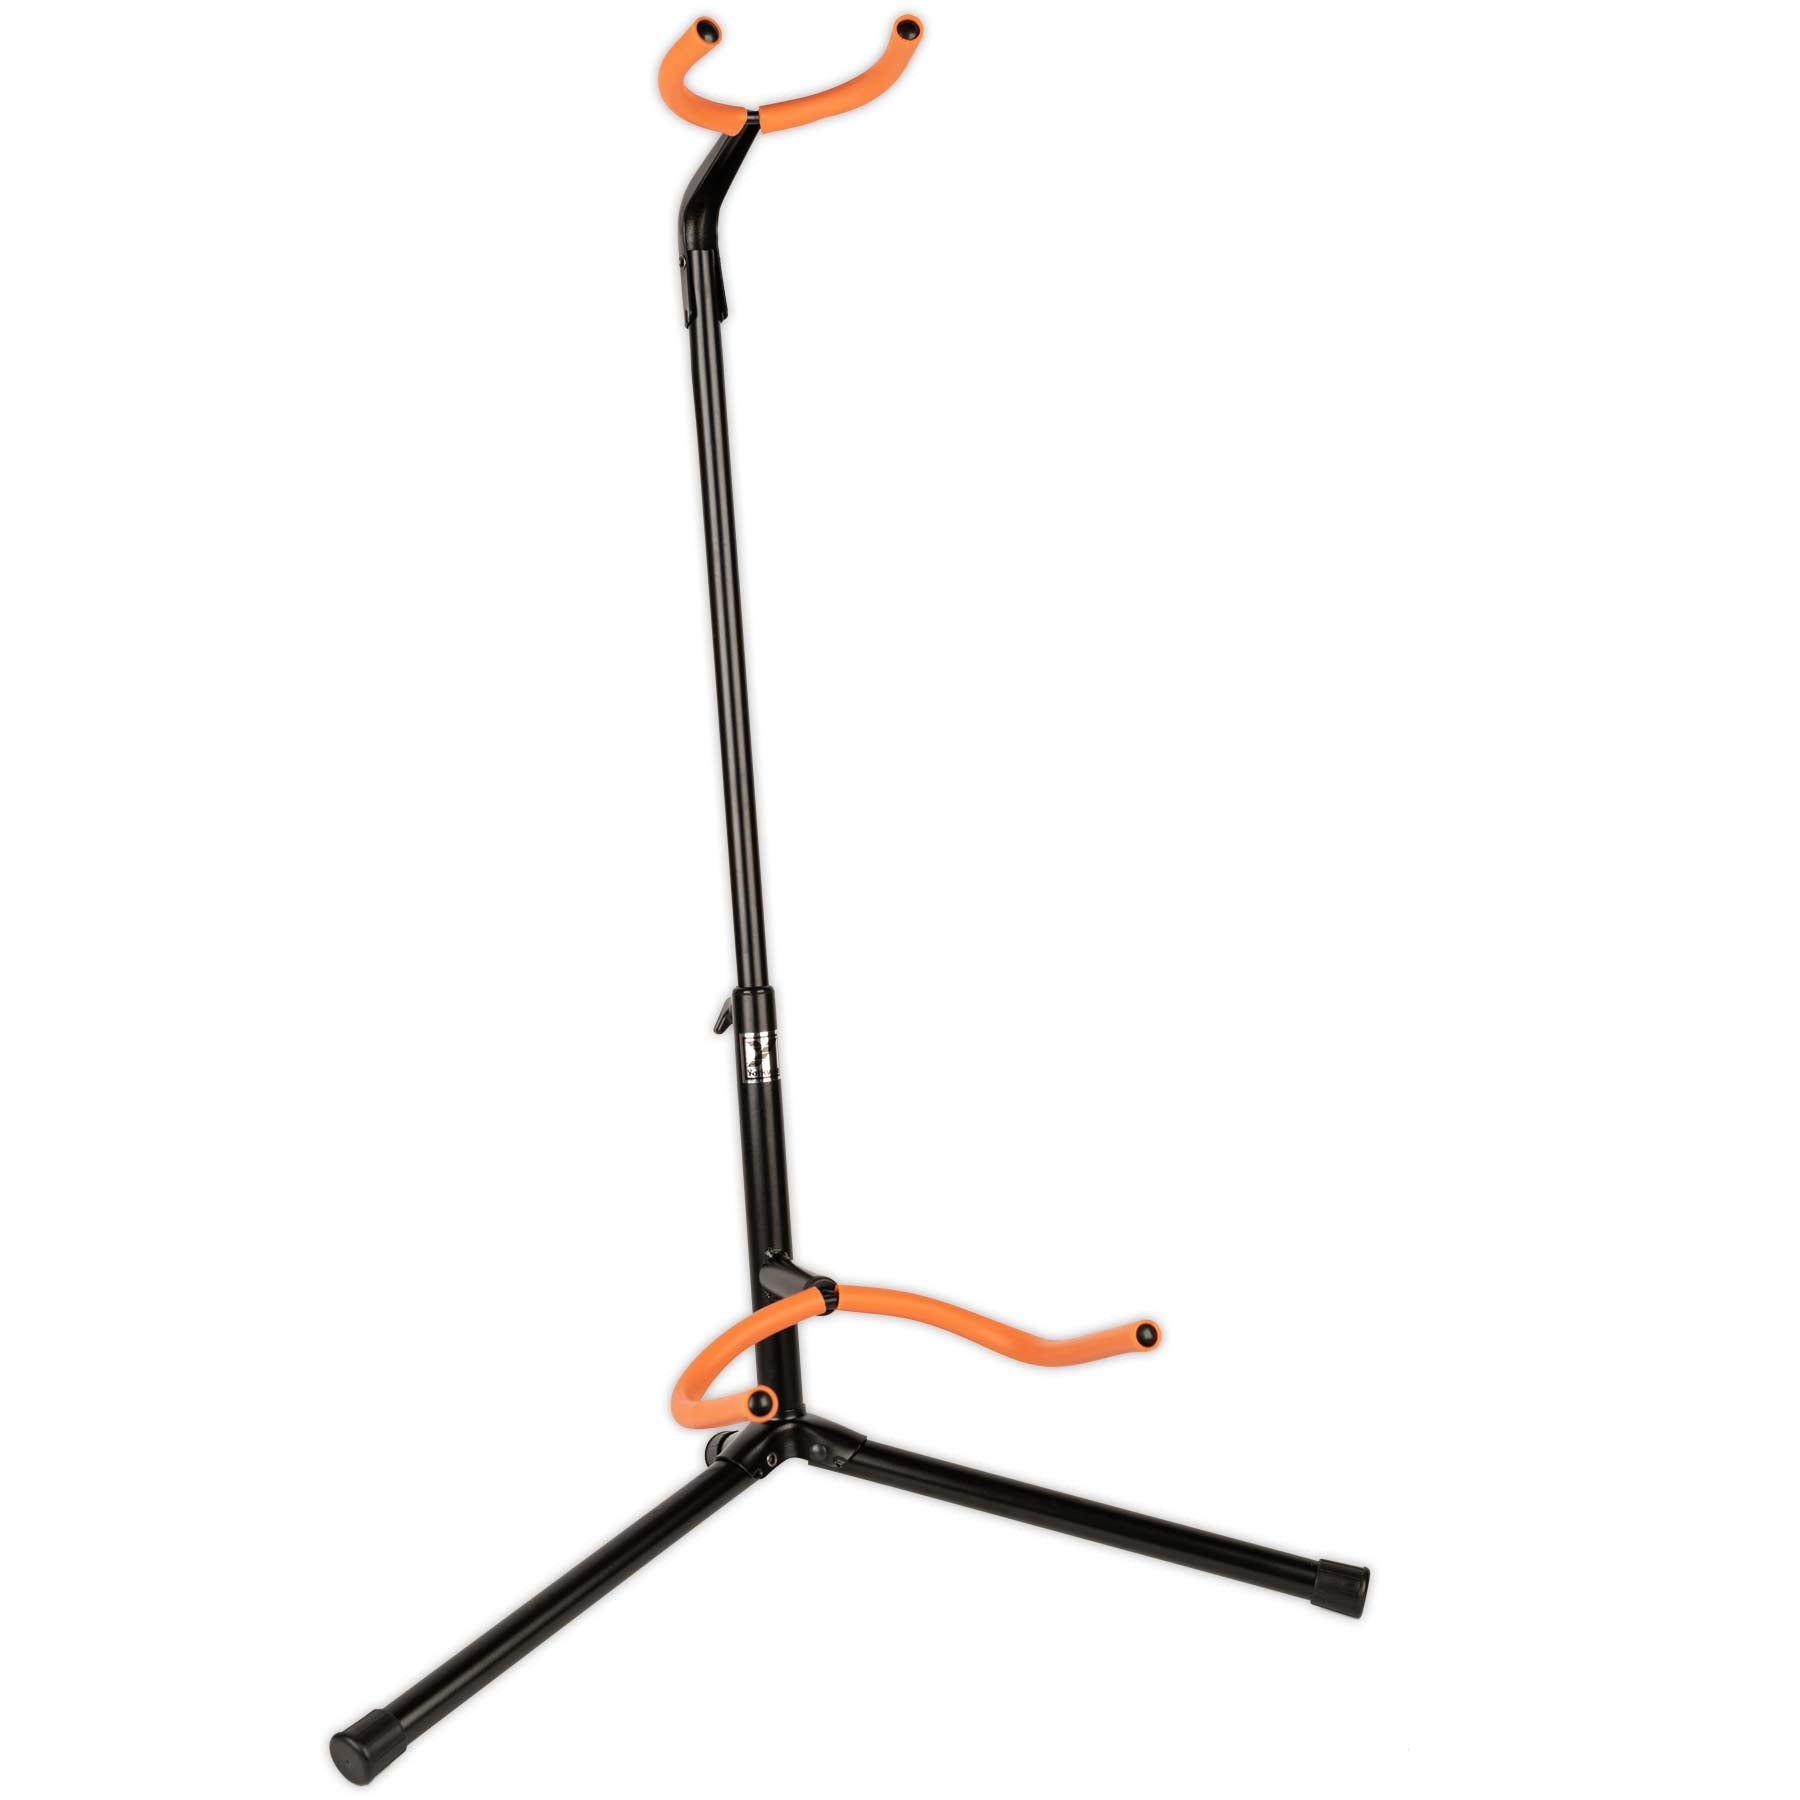 YORKVILLE SINGLE GUITAR STAND